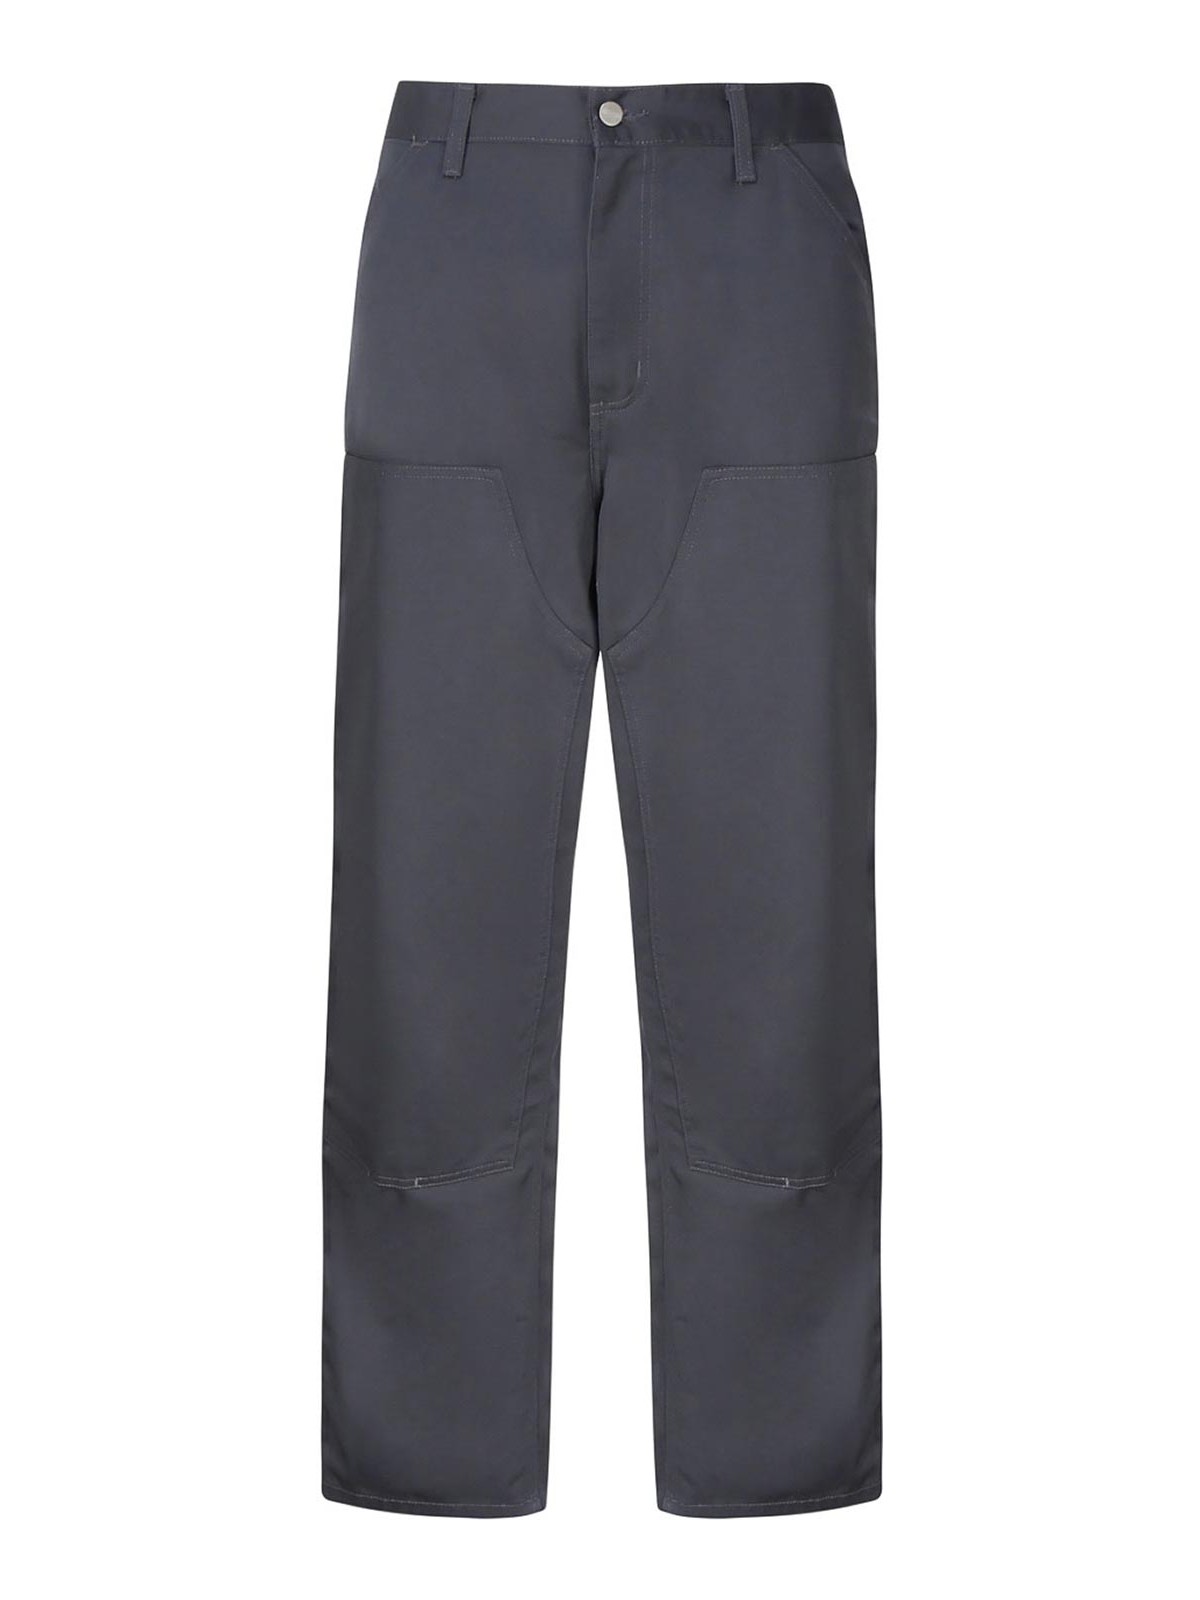 Carhartt Trousers With Knee Detail In Grey